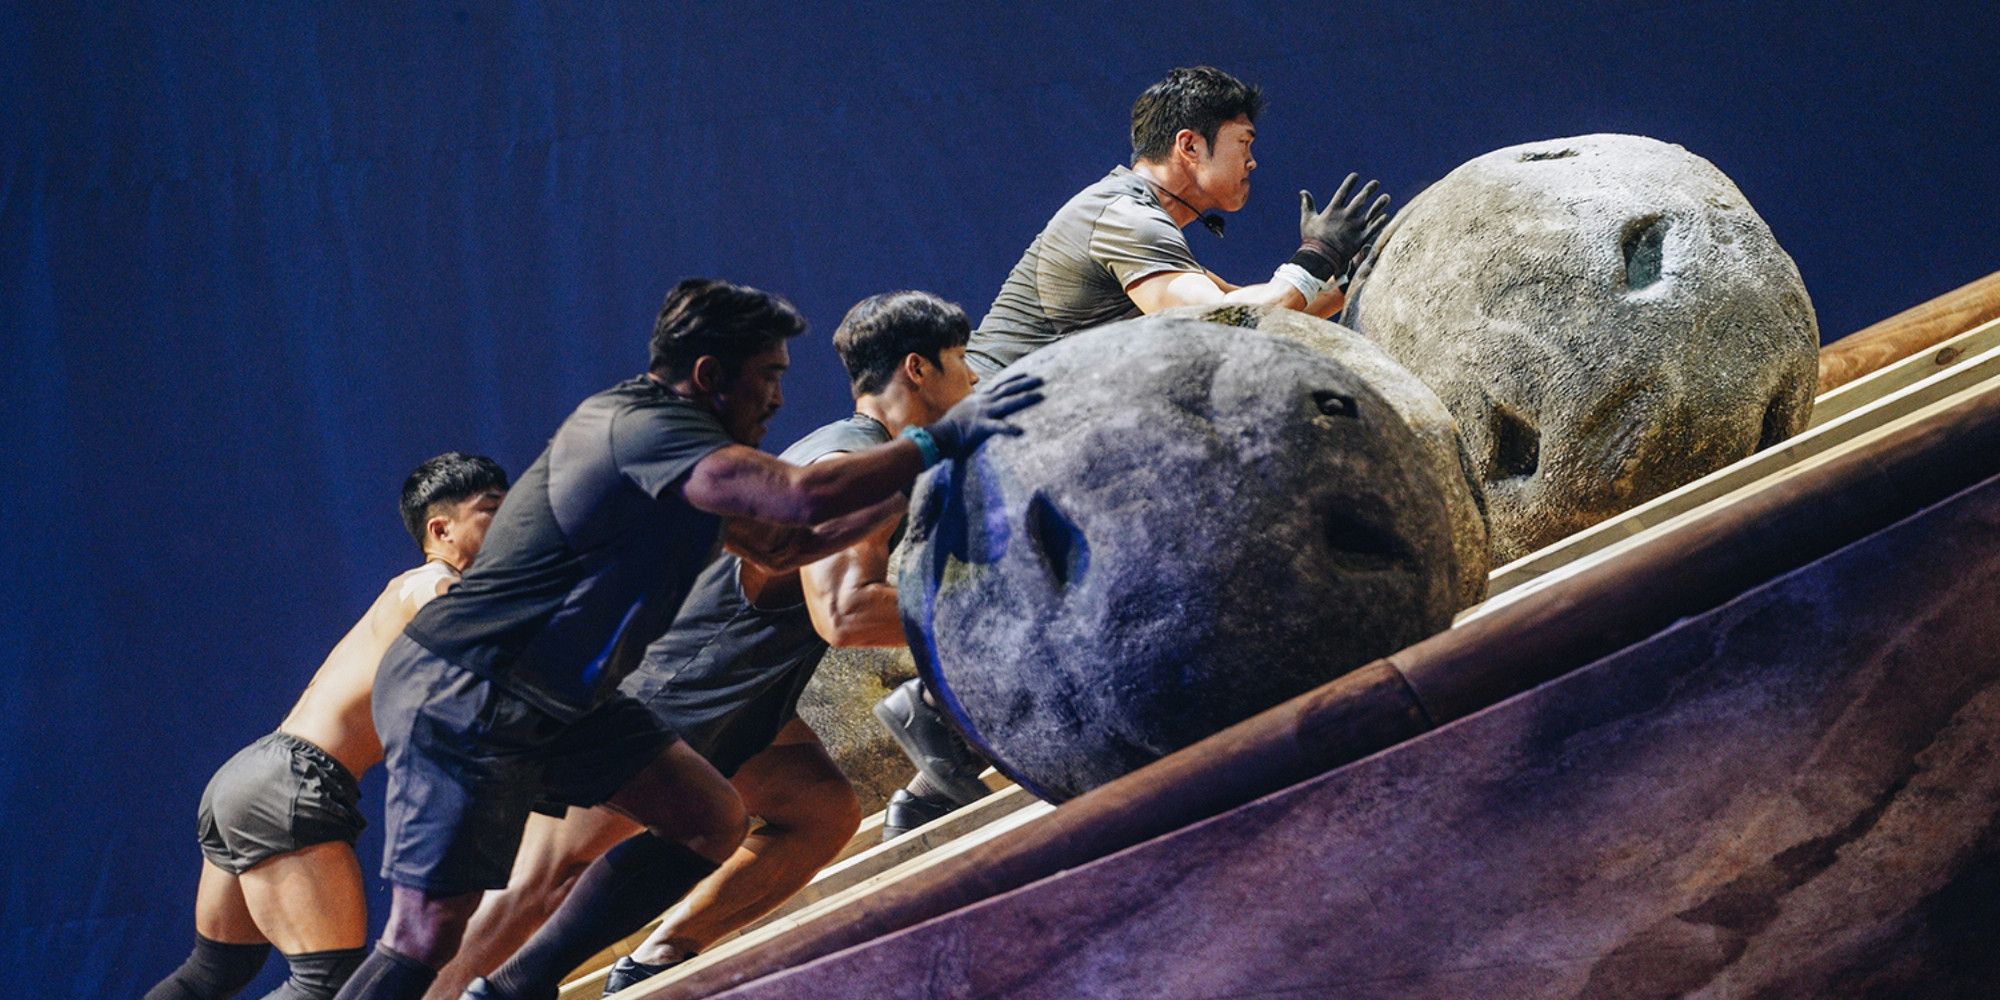 4 contestants on Netflix's Physical 100. They are all rolling large boulders up an incline. 